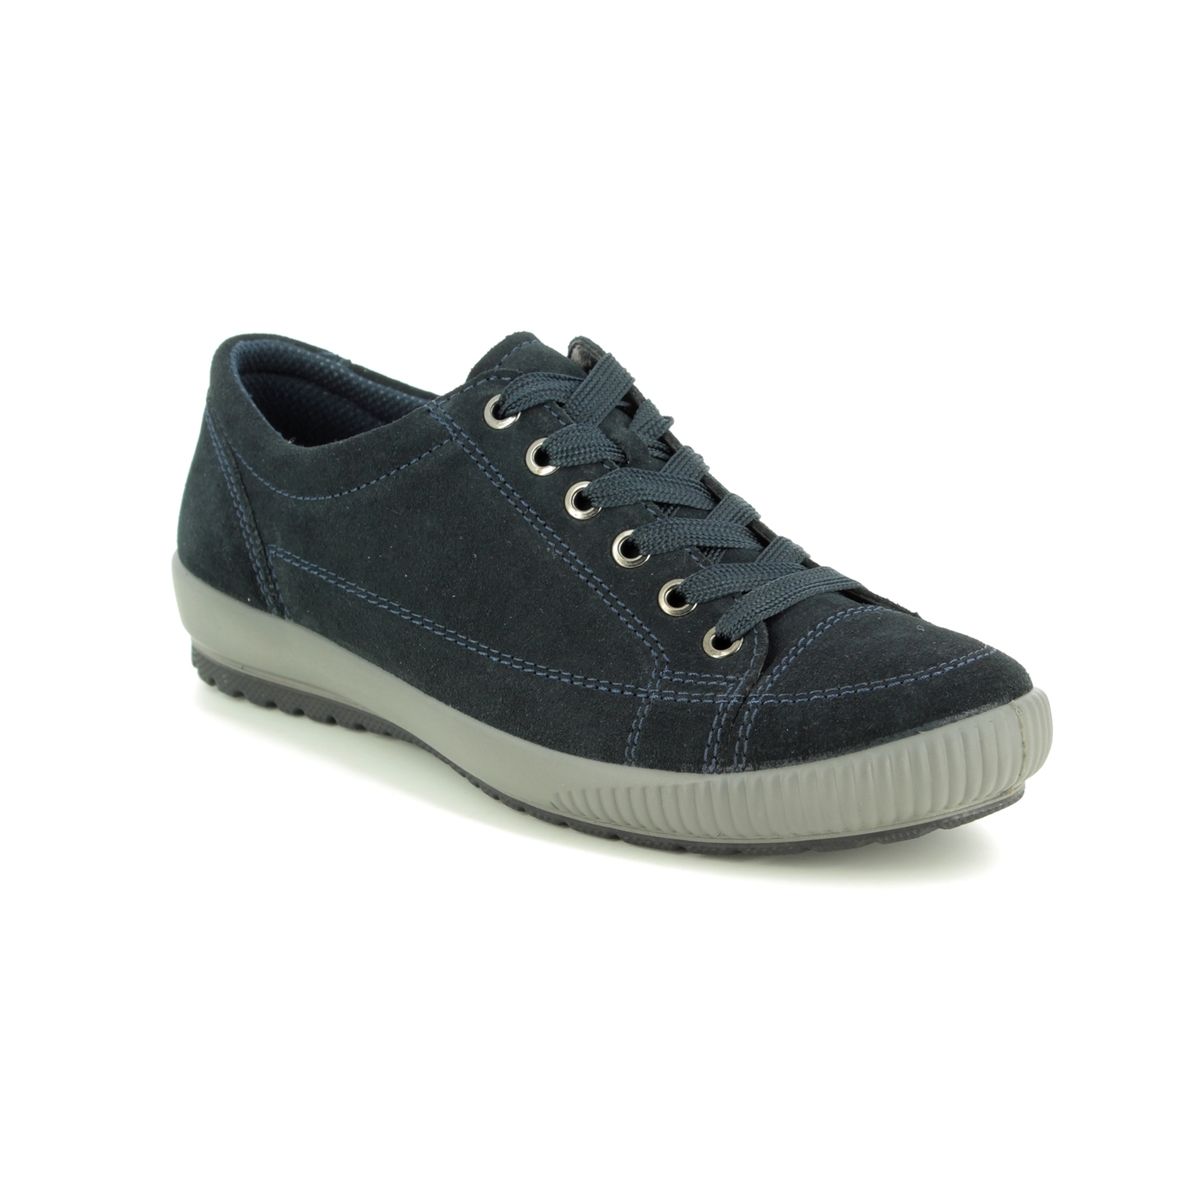 Legero Tanaro Stitch Navy Suede Womens Lacing Shoes 00820-80 In Size 9 In Plain Navy Suede